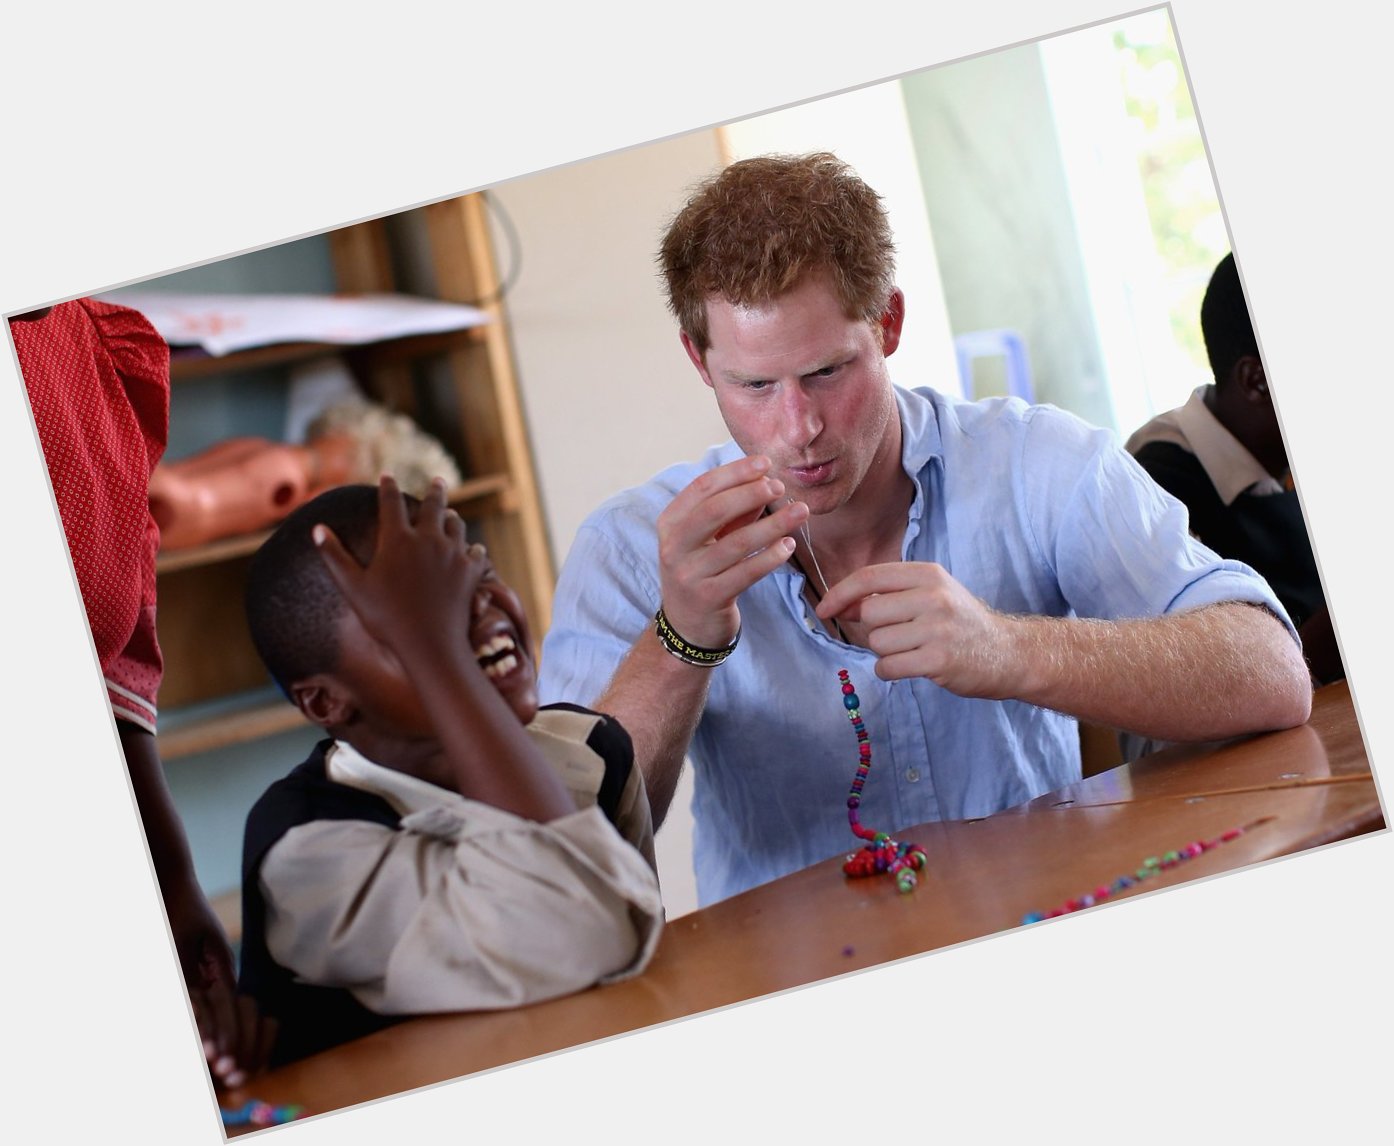 Wishing our Co-Founding Patron Prince Harry a very happy birthday! 